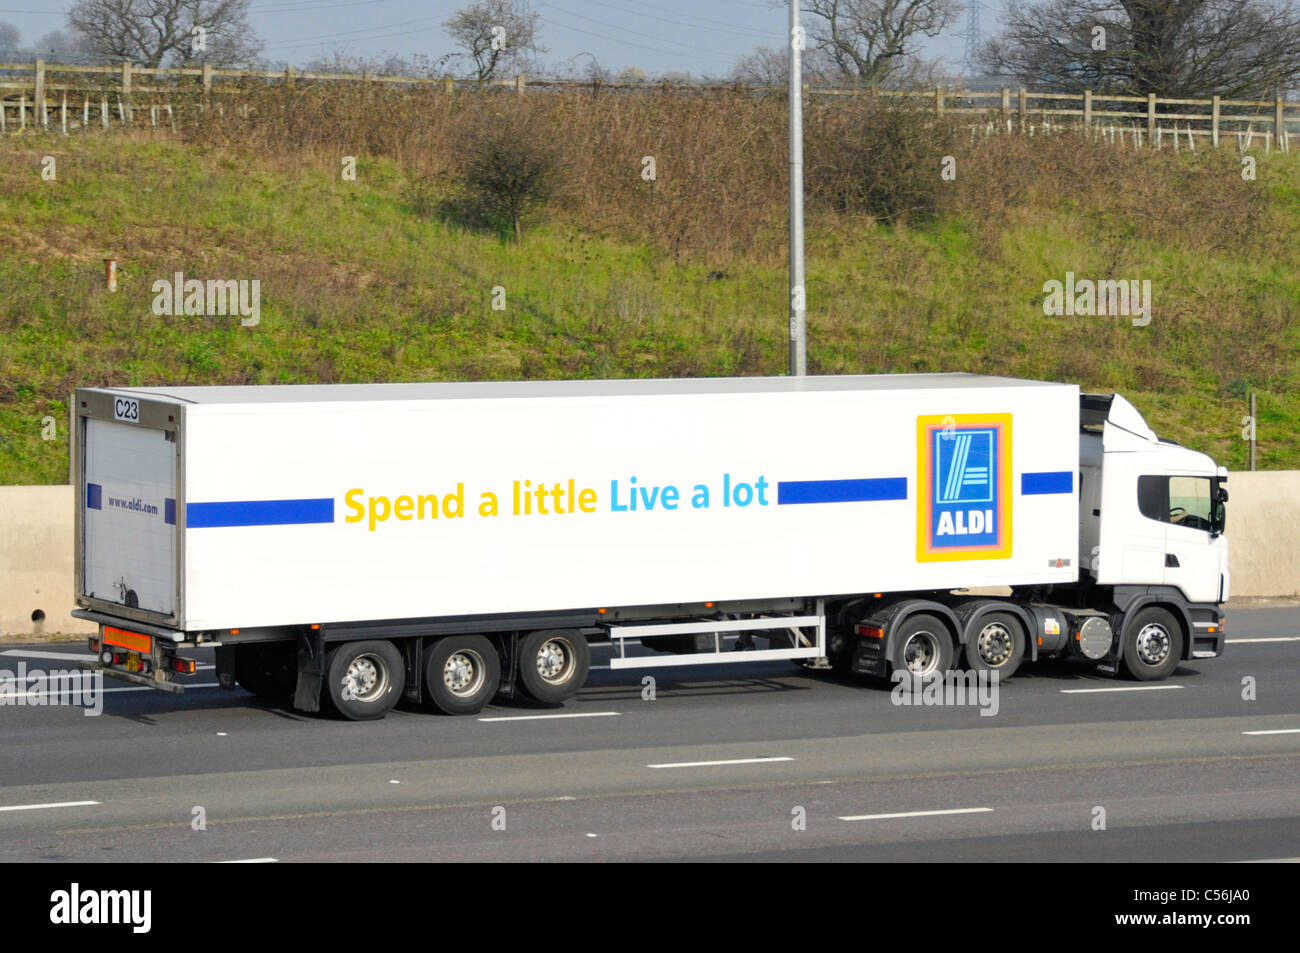 Aldi supermarket delivery trailer and lorry with advertising and logo Stock Photo